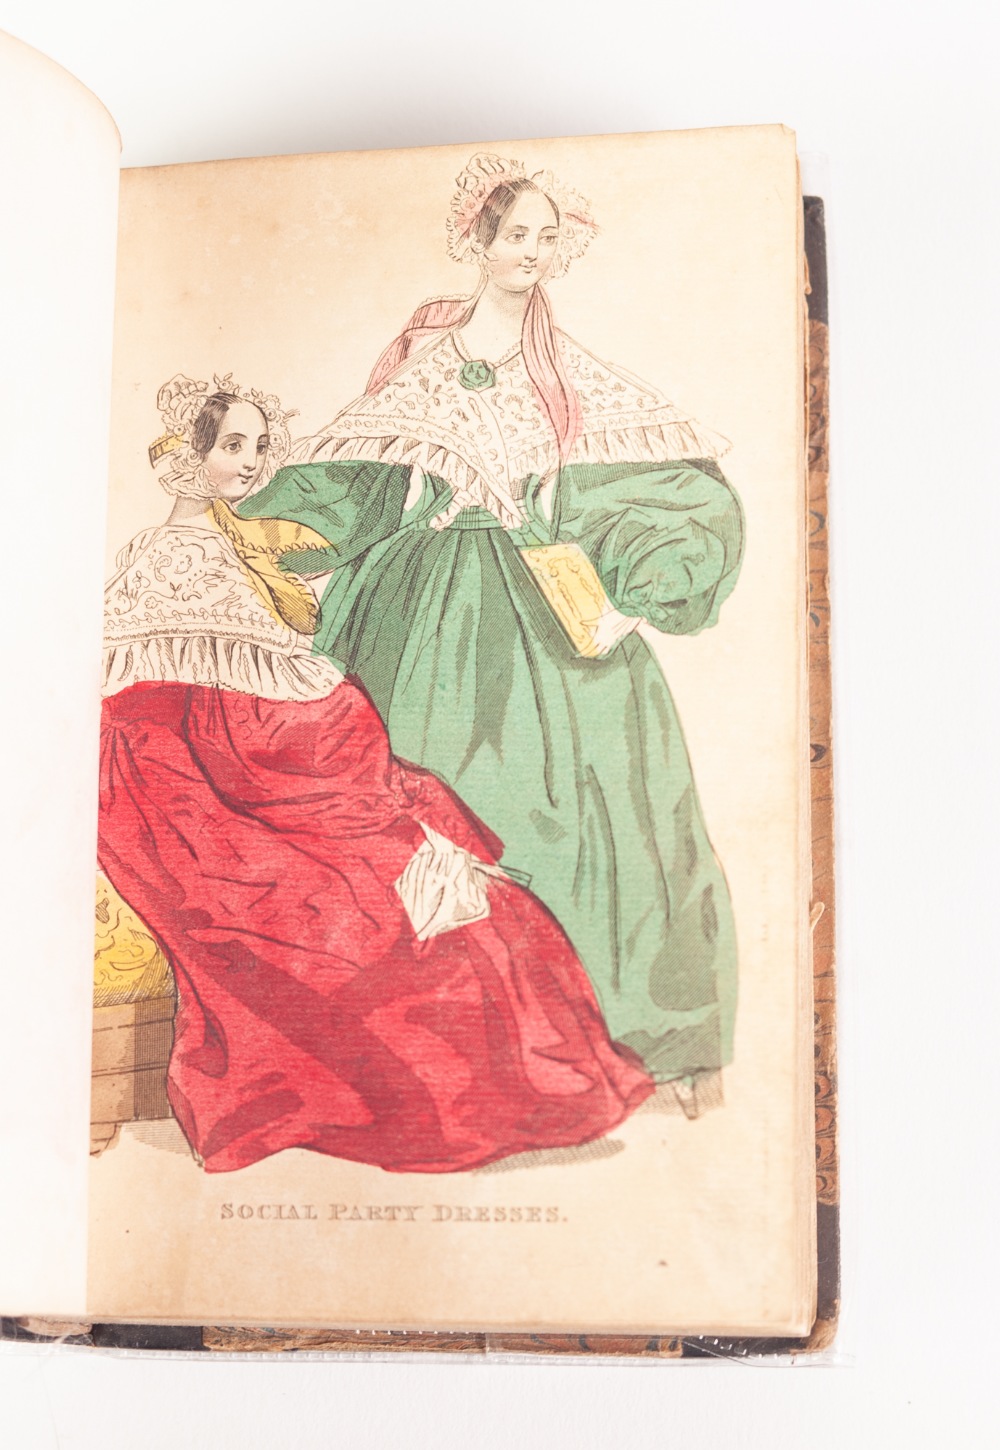 LADIES CABINET OF FASHION, MUSIC AND ROMANCE, Published George Henderson, Vol VII (1842) and vol - Image 8 of 8